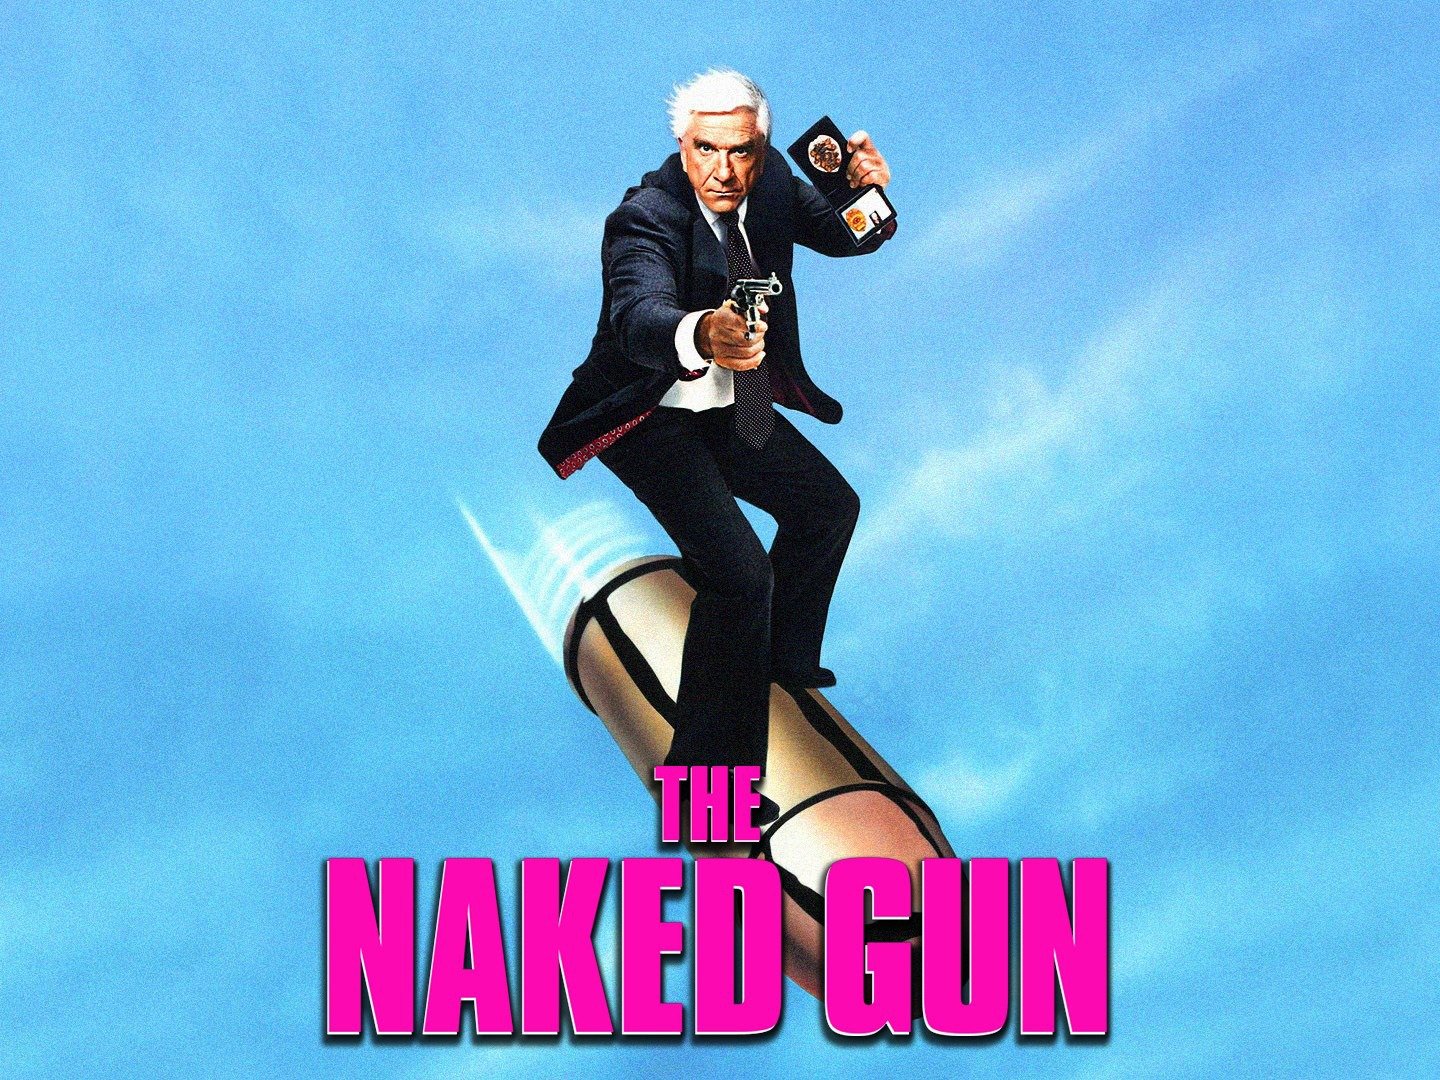 The Naked Gun Trailer 1 Trailers Videos Rotten Tomatoes